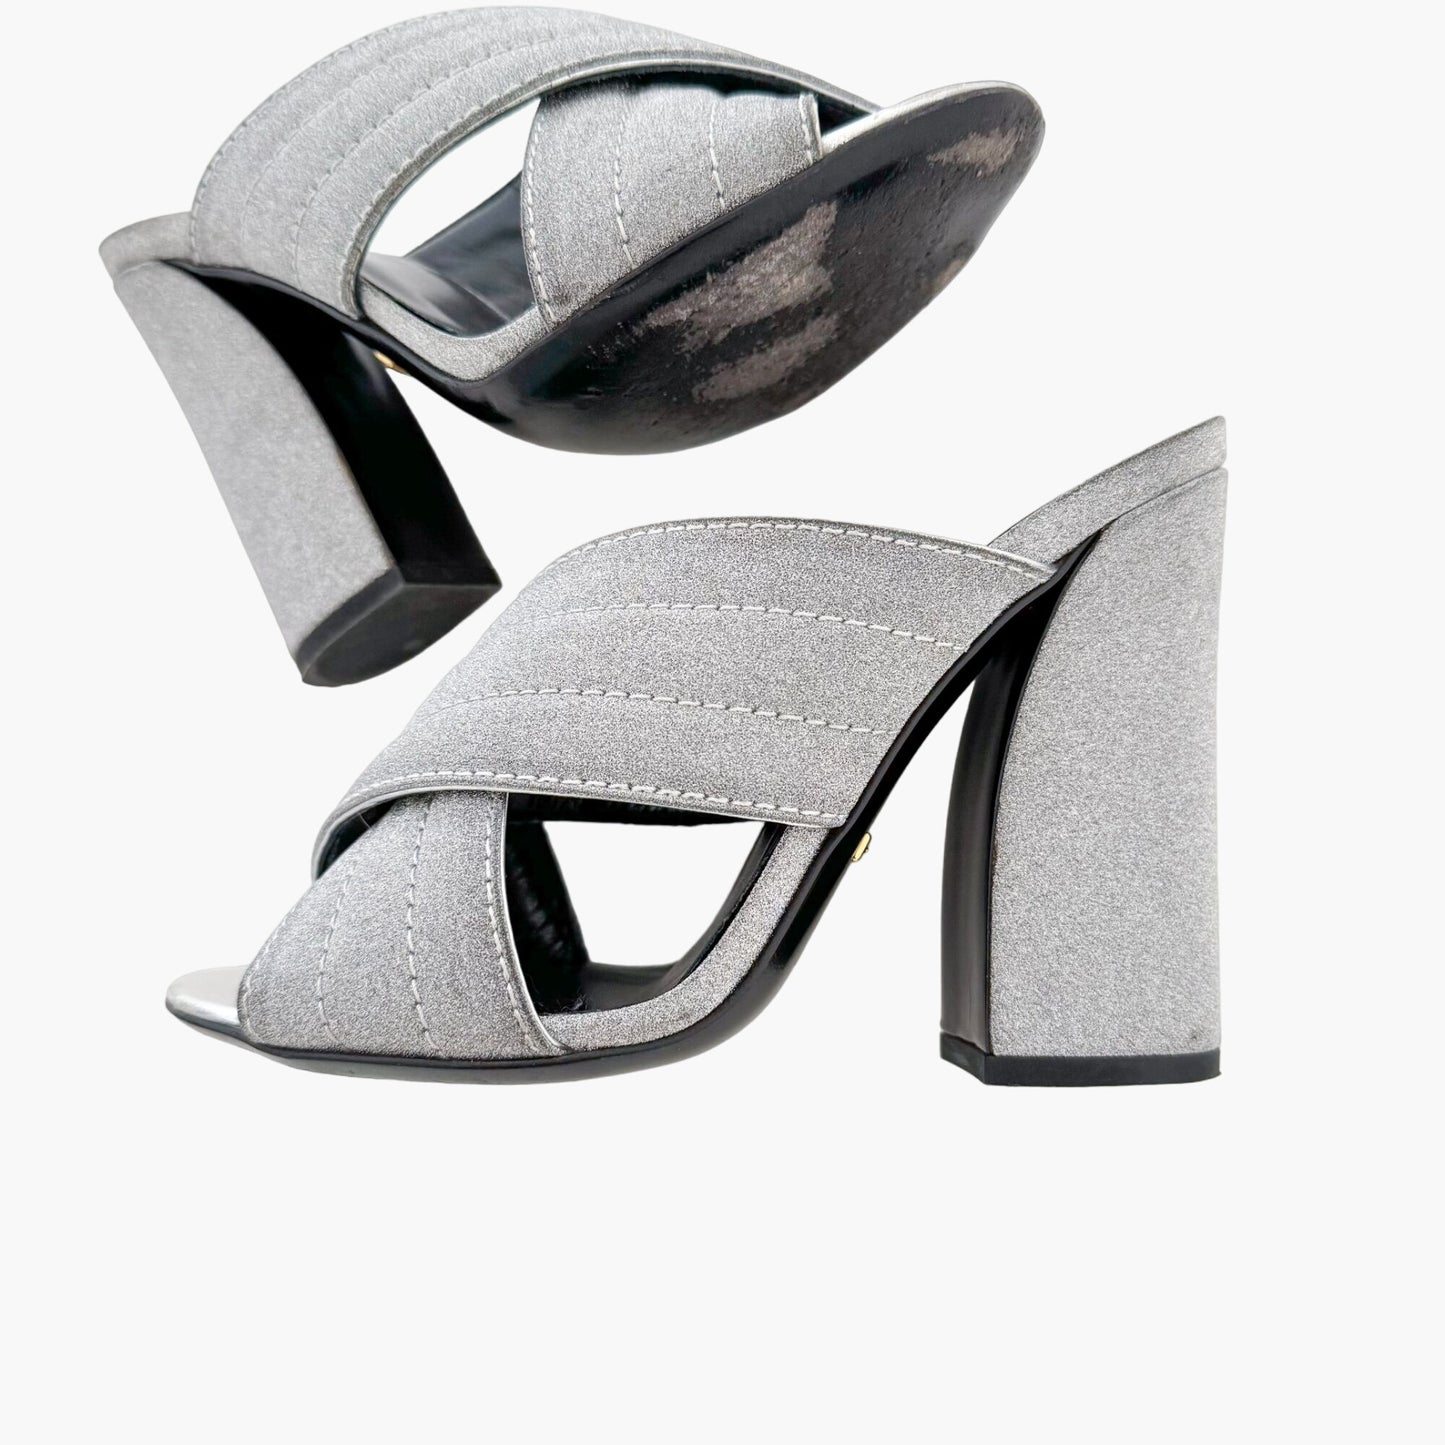 Gucci Webby Mules in Argento Silver Glitter Size 37